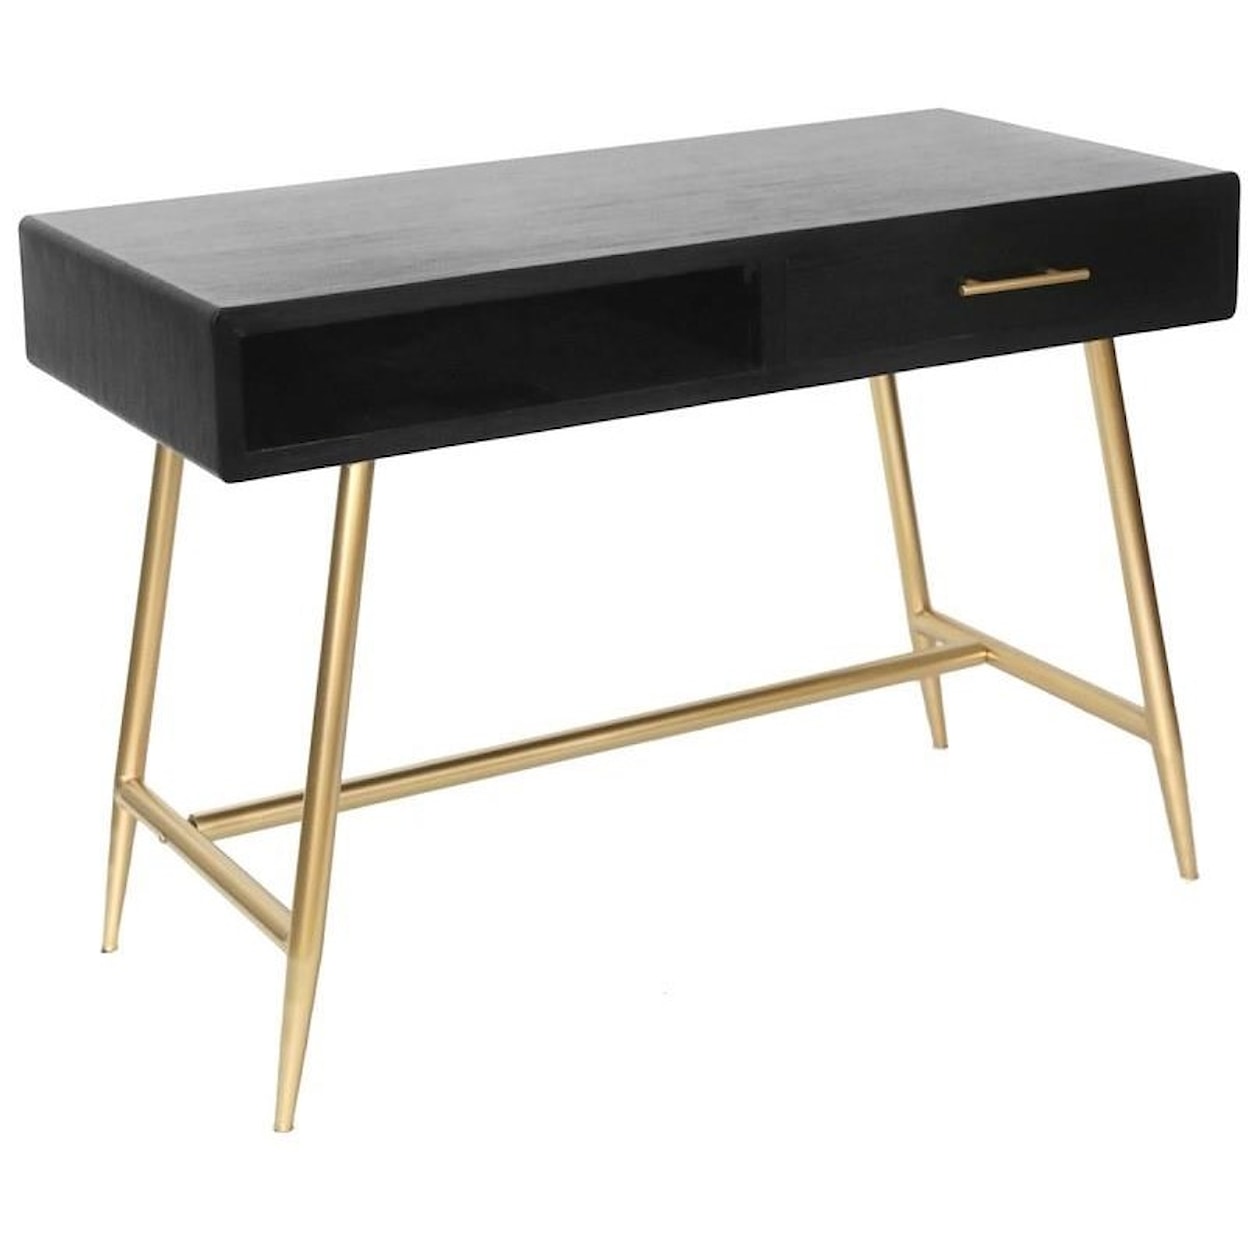 Crestview Collection EVFZR Silas Black and Gold Metal Desk